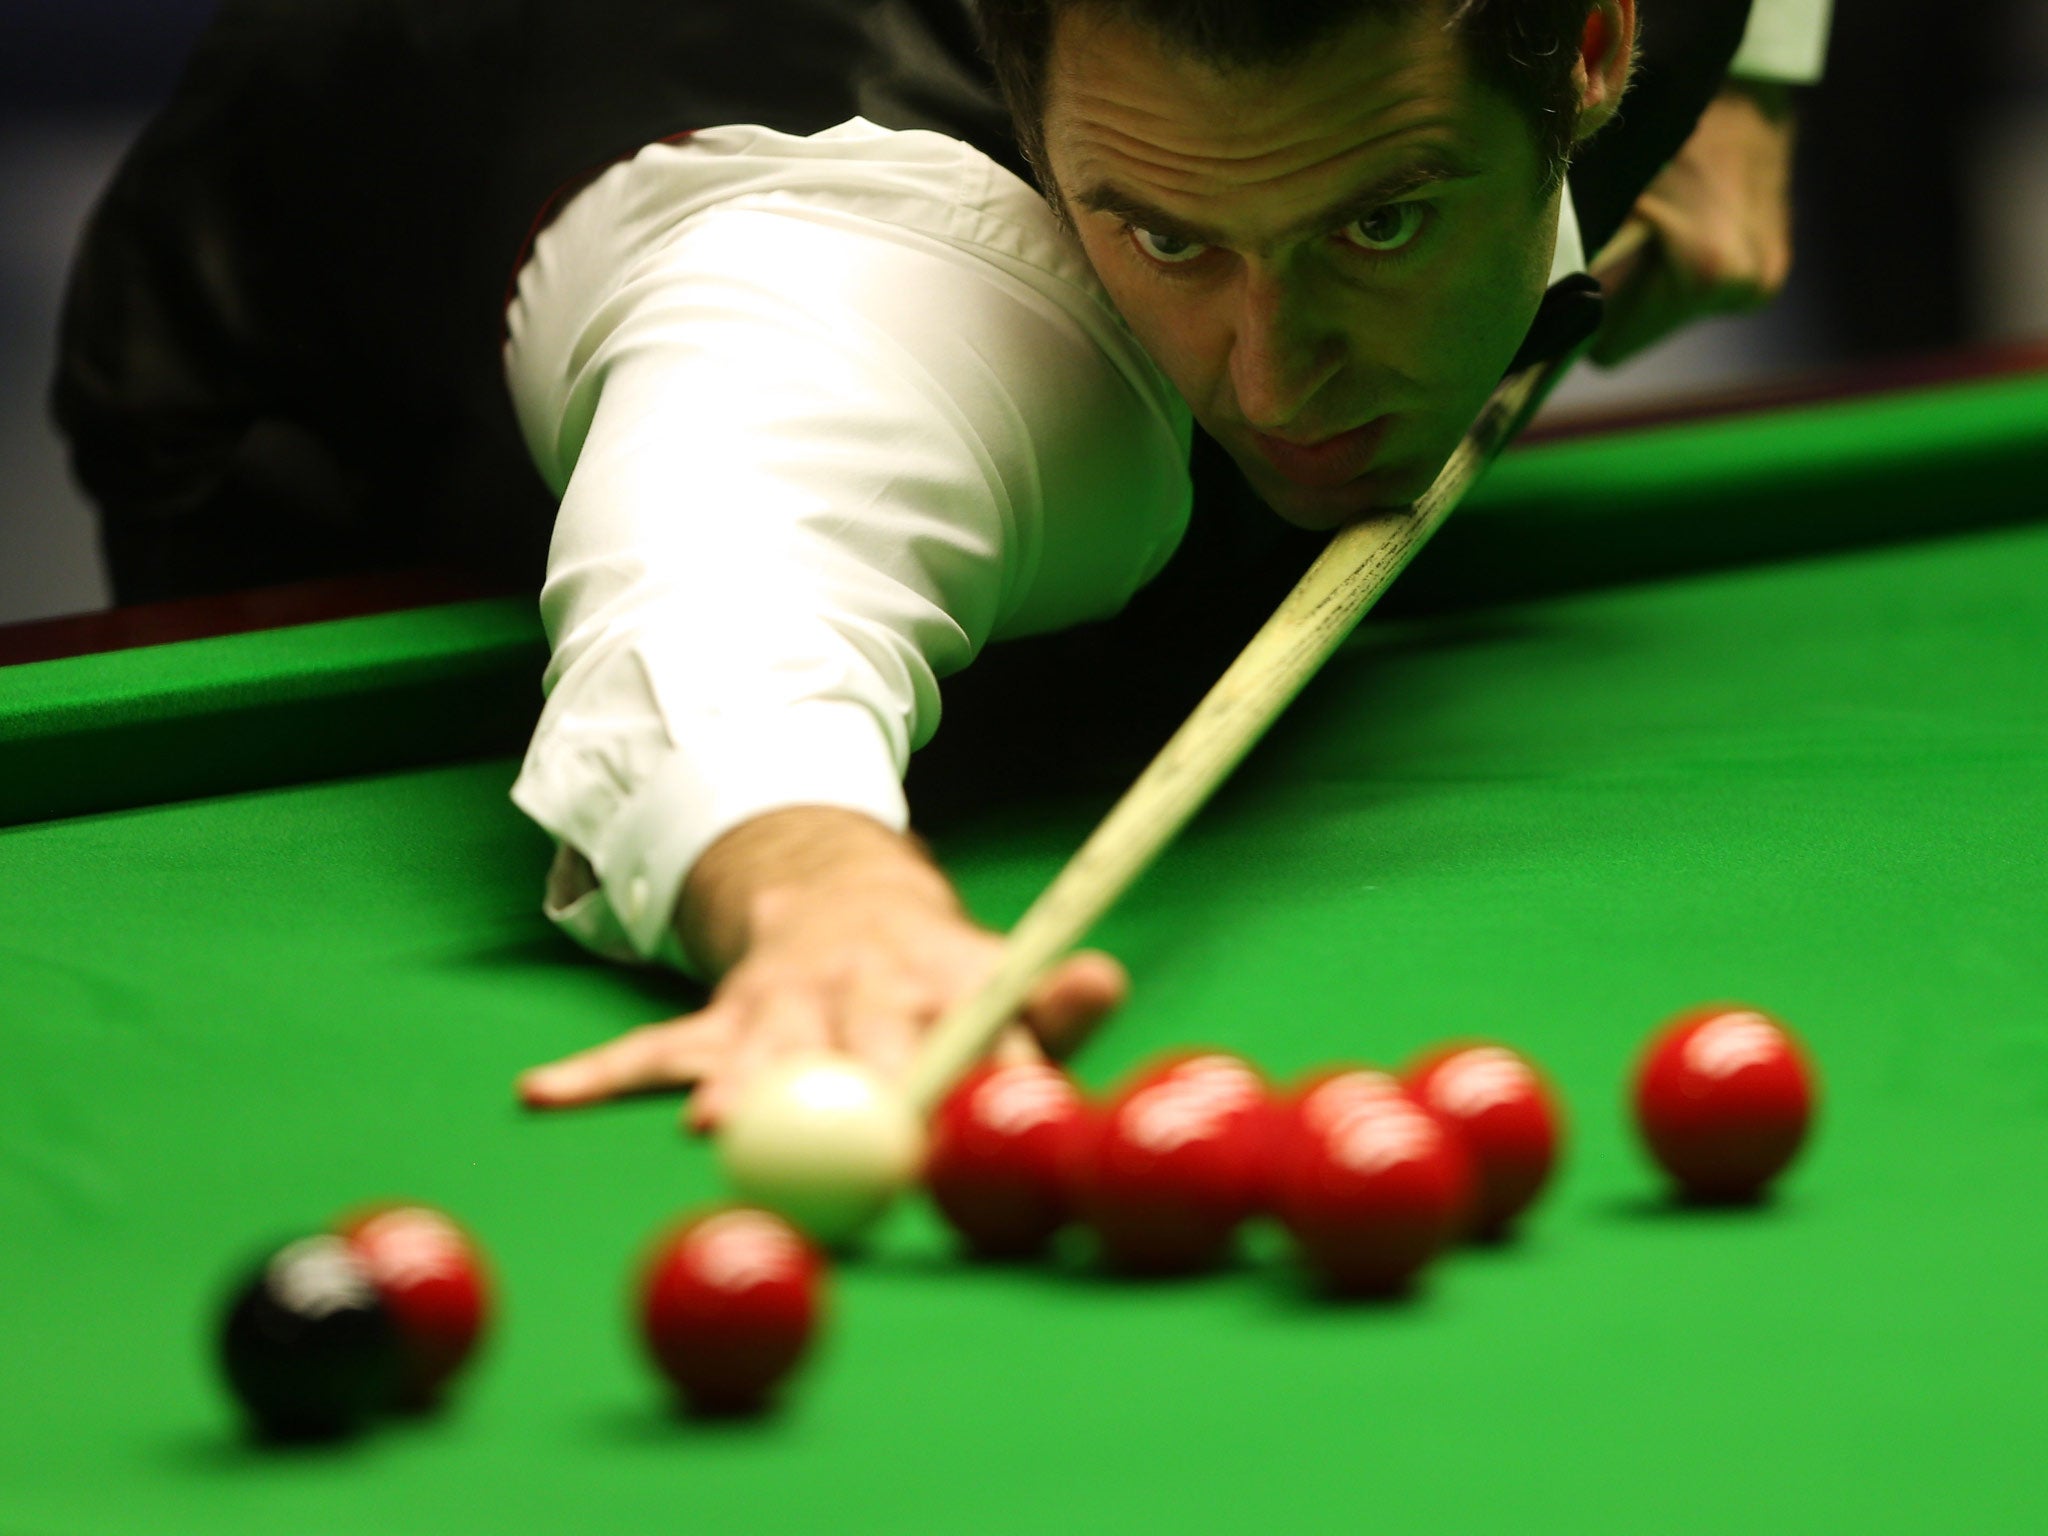 Ronnie O'Sullivan won his fifth Masters title on Sunday